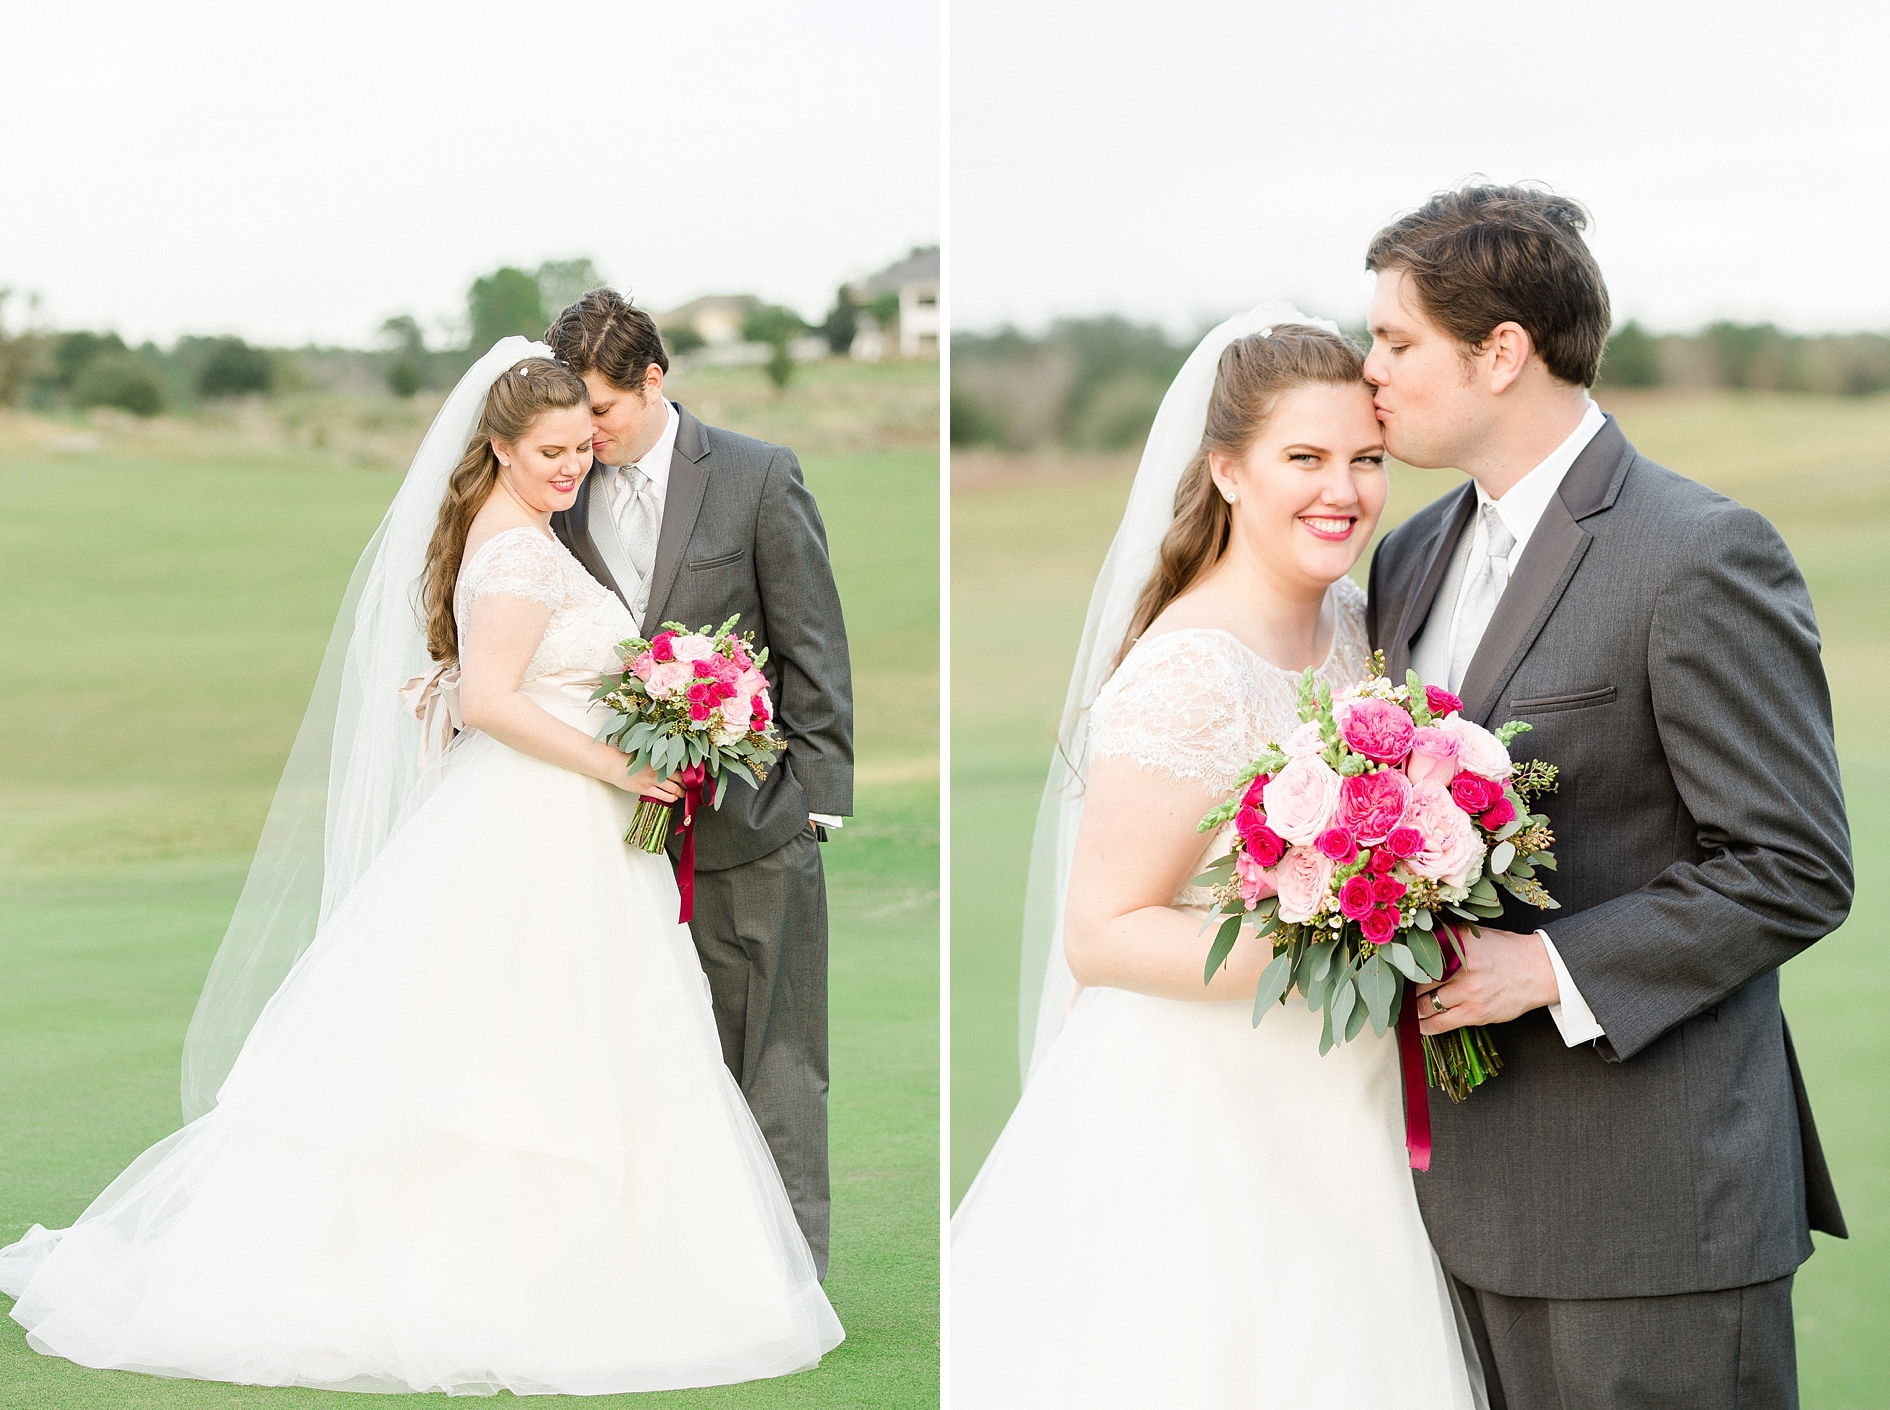 The Southern Hills Plantation | @ Ailyn La Torre Photography 2016